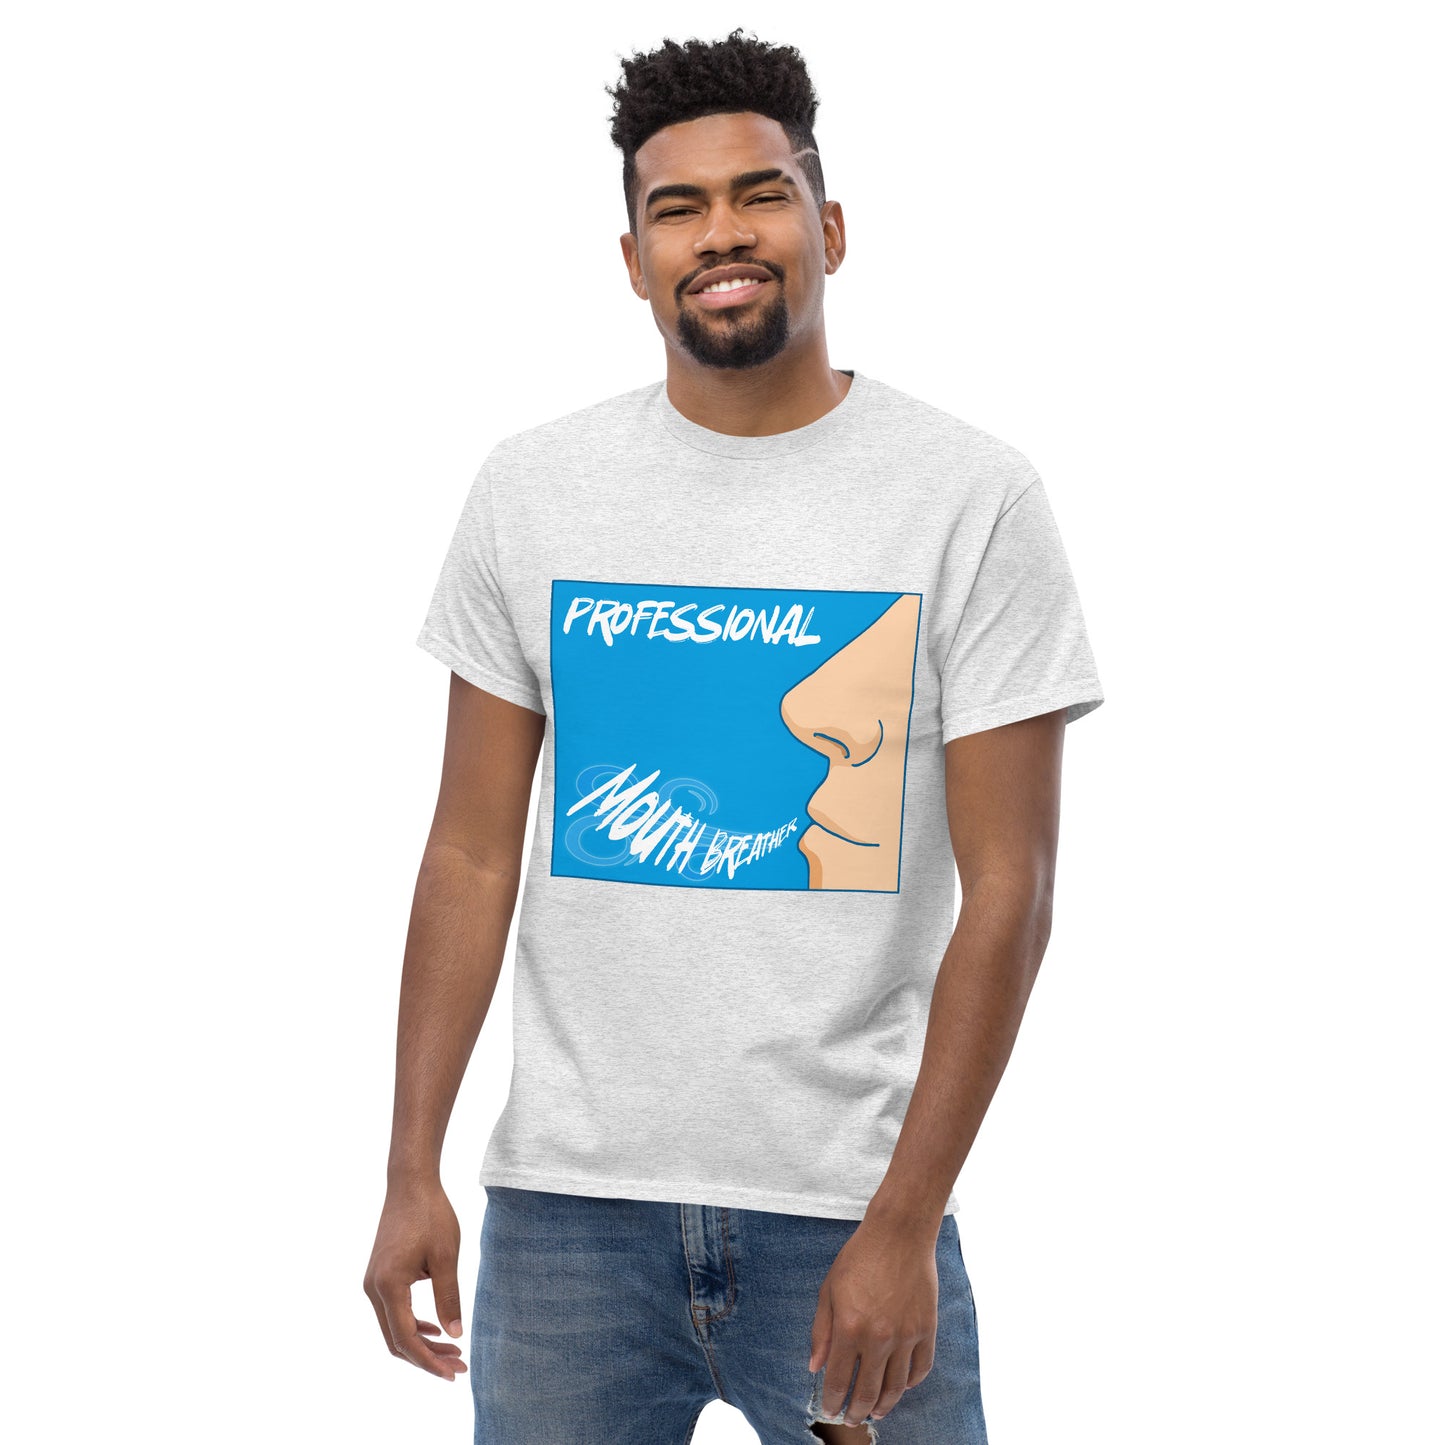 Pro Mouth Breather - Men's Tee 2